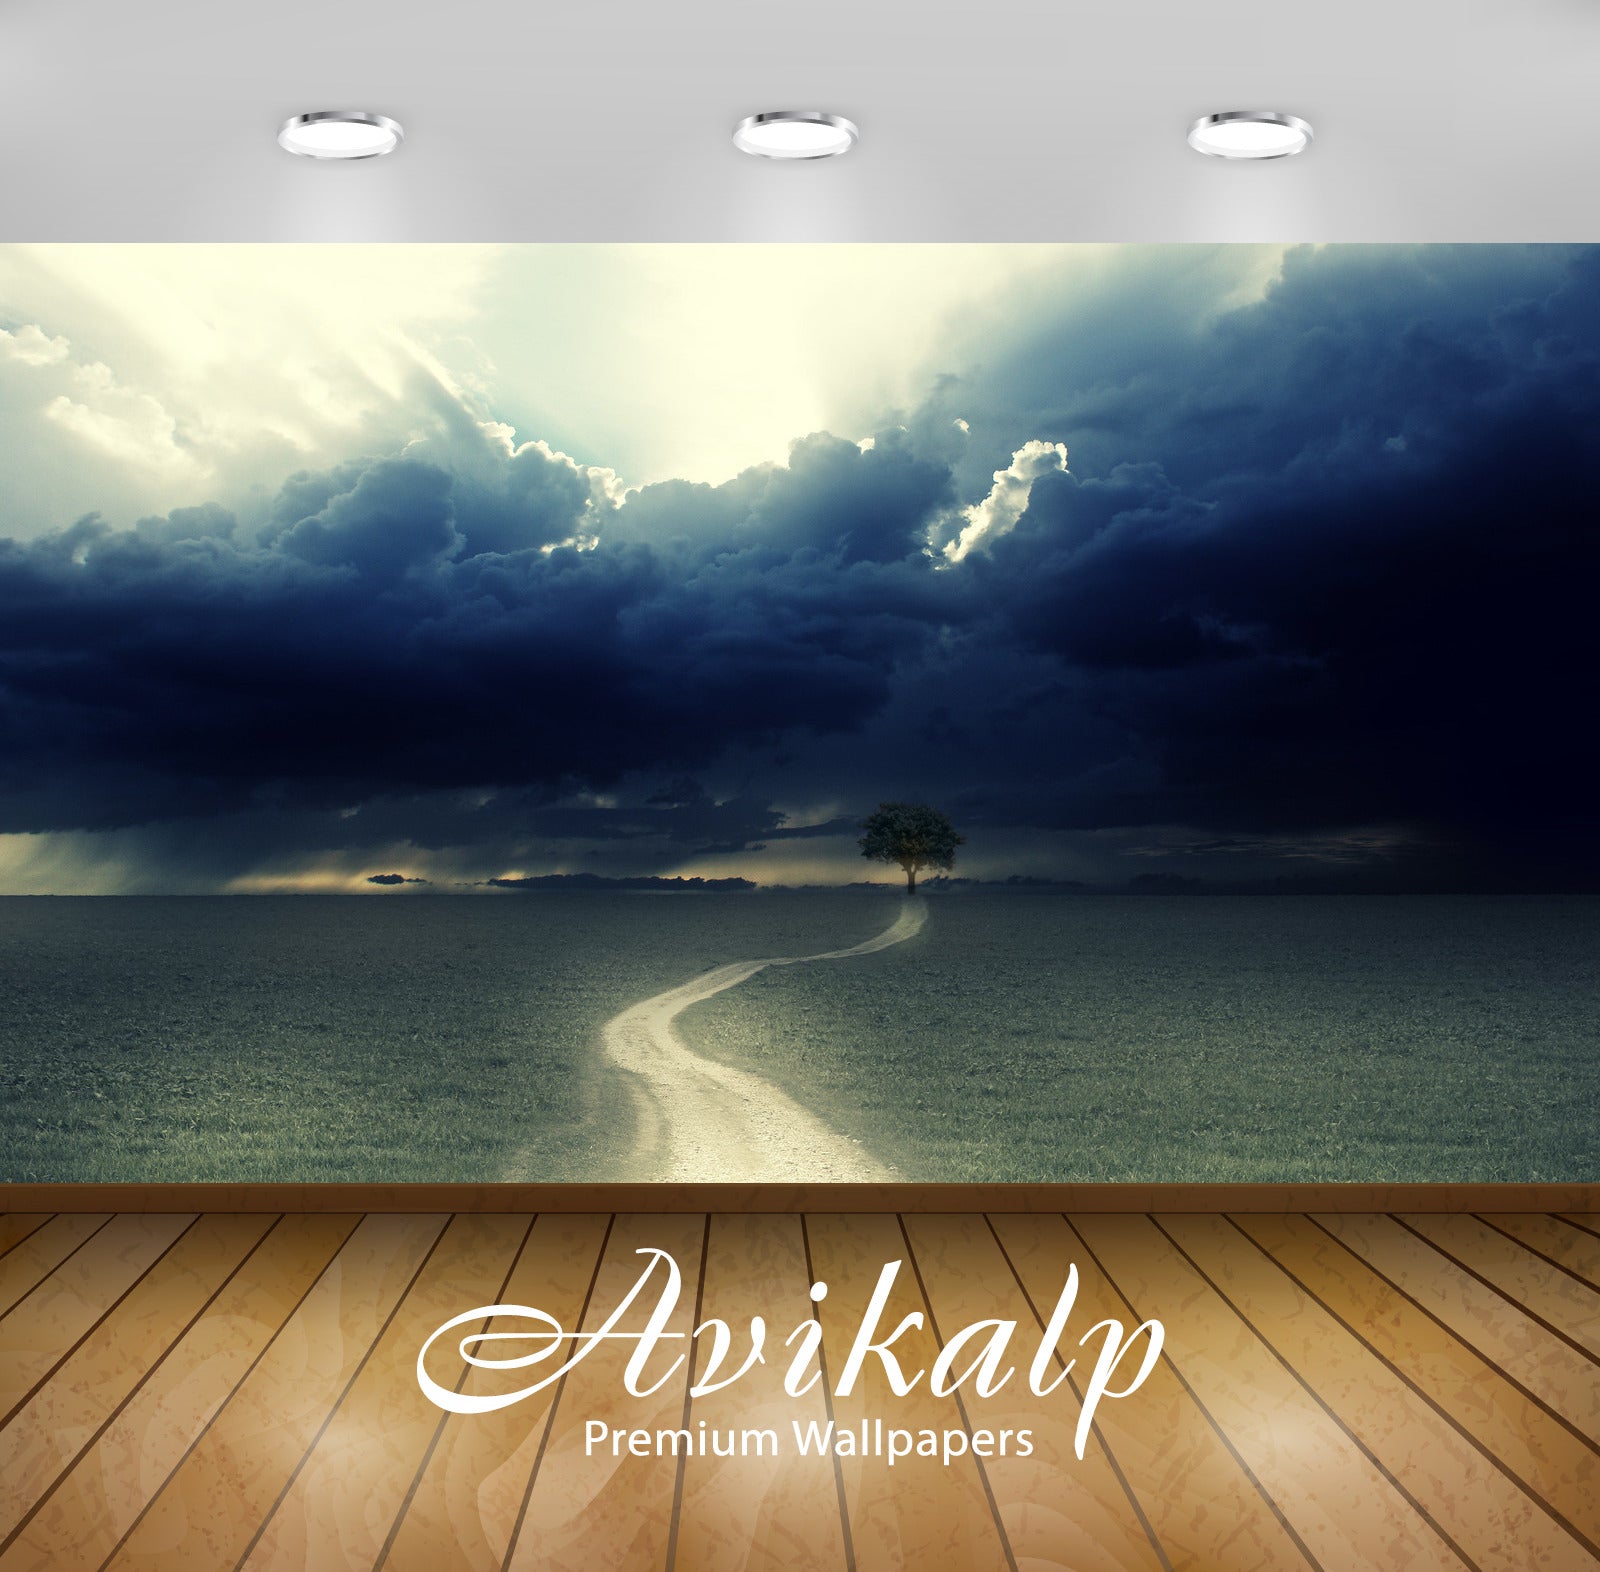 Avikalp Exclusive Awi1542 Calm Before The Storm Full HD Wallpapers for Living room, Hall, Kids Room,